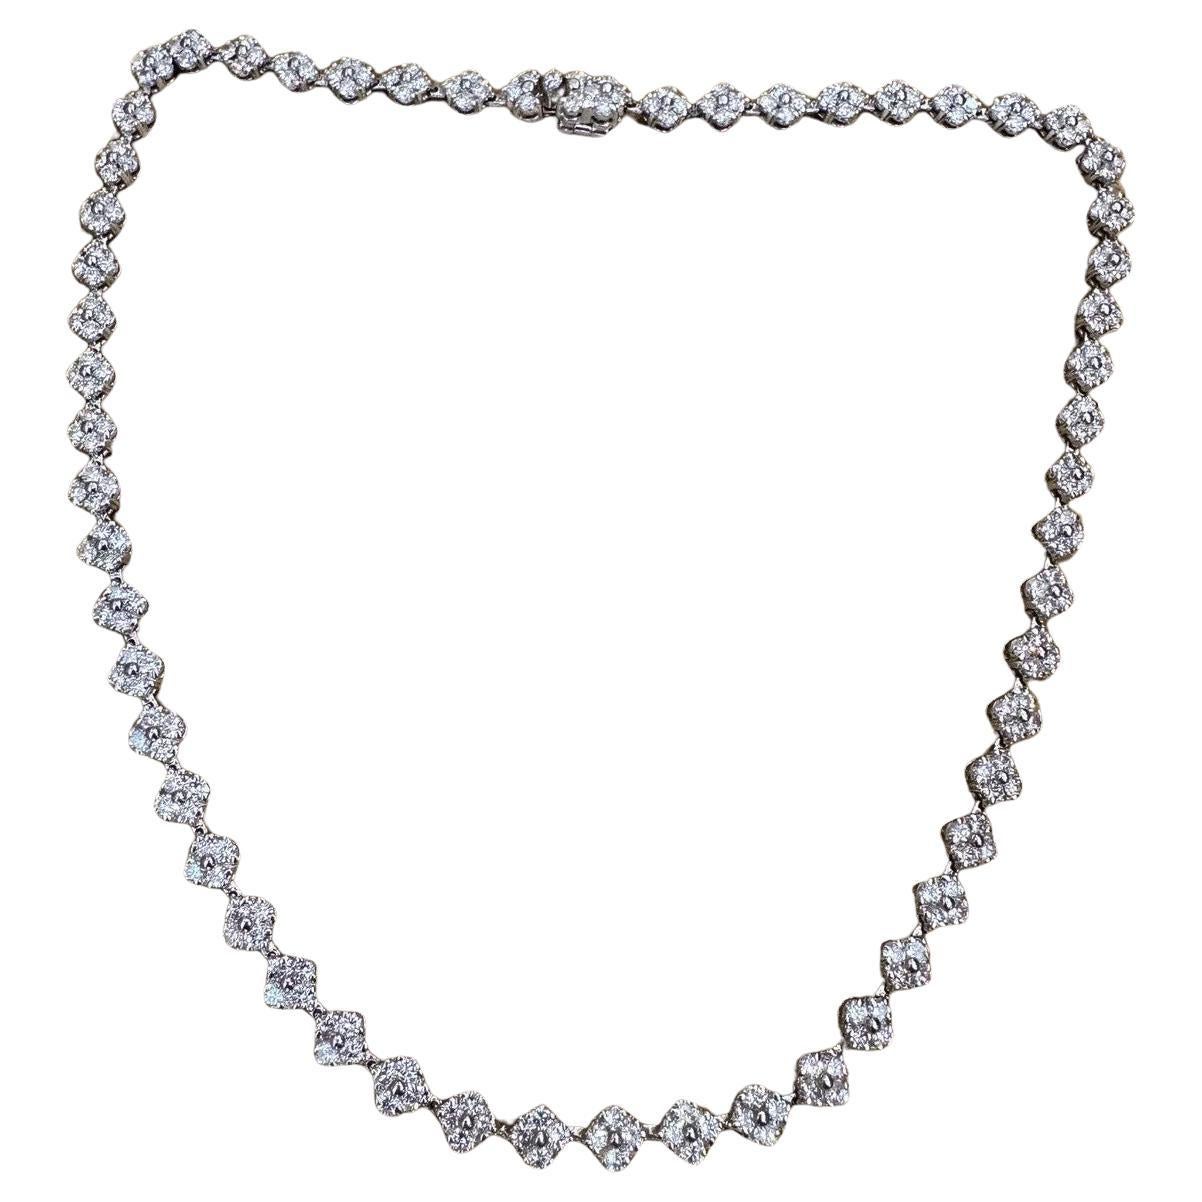 Floret Cluster Diamond Choker Necklace 10.34 Carat Total Weight in Platinum For Sale